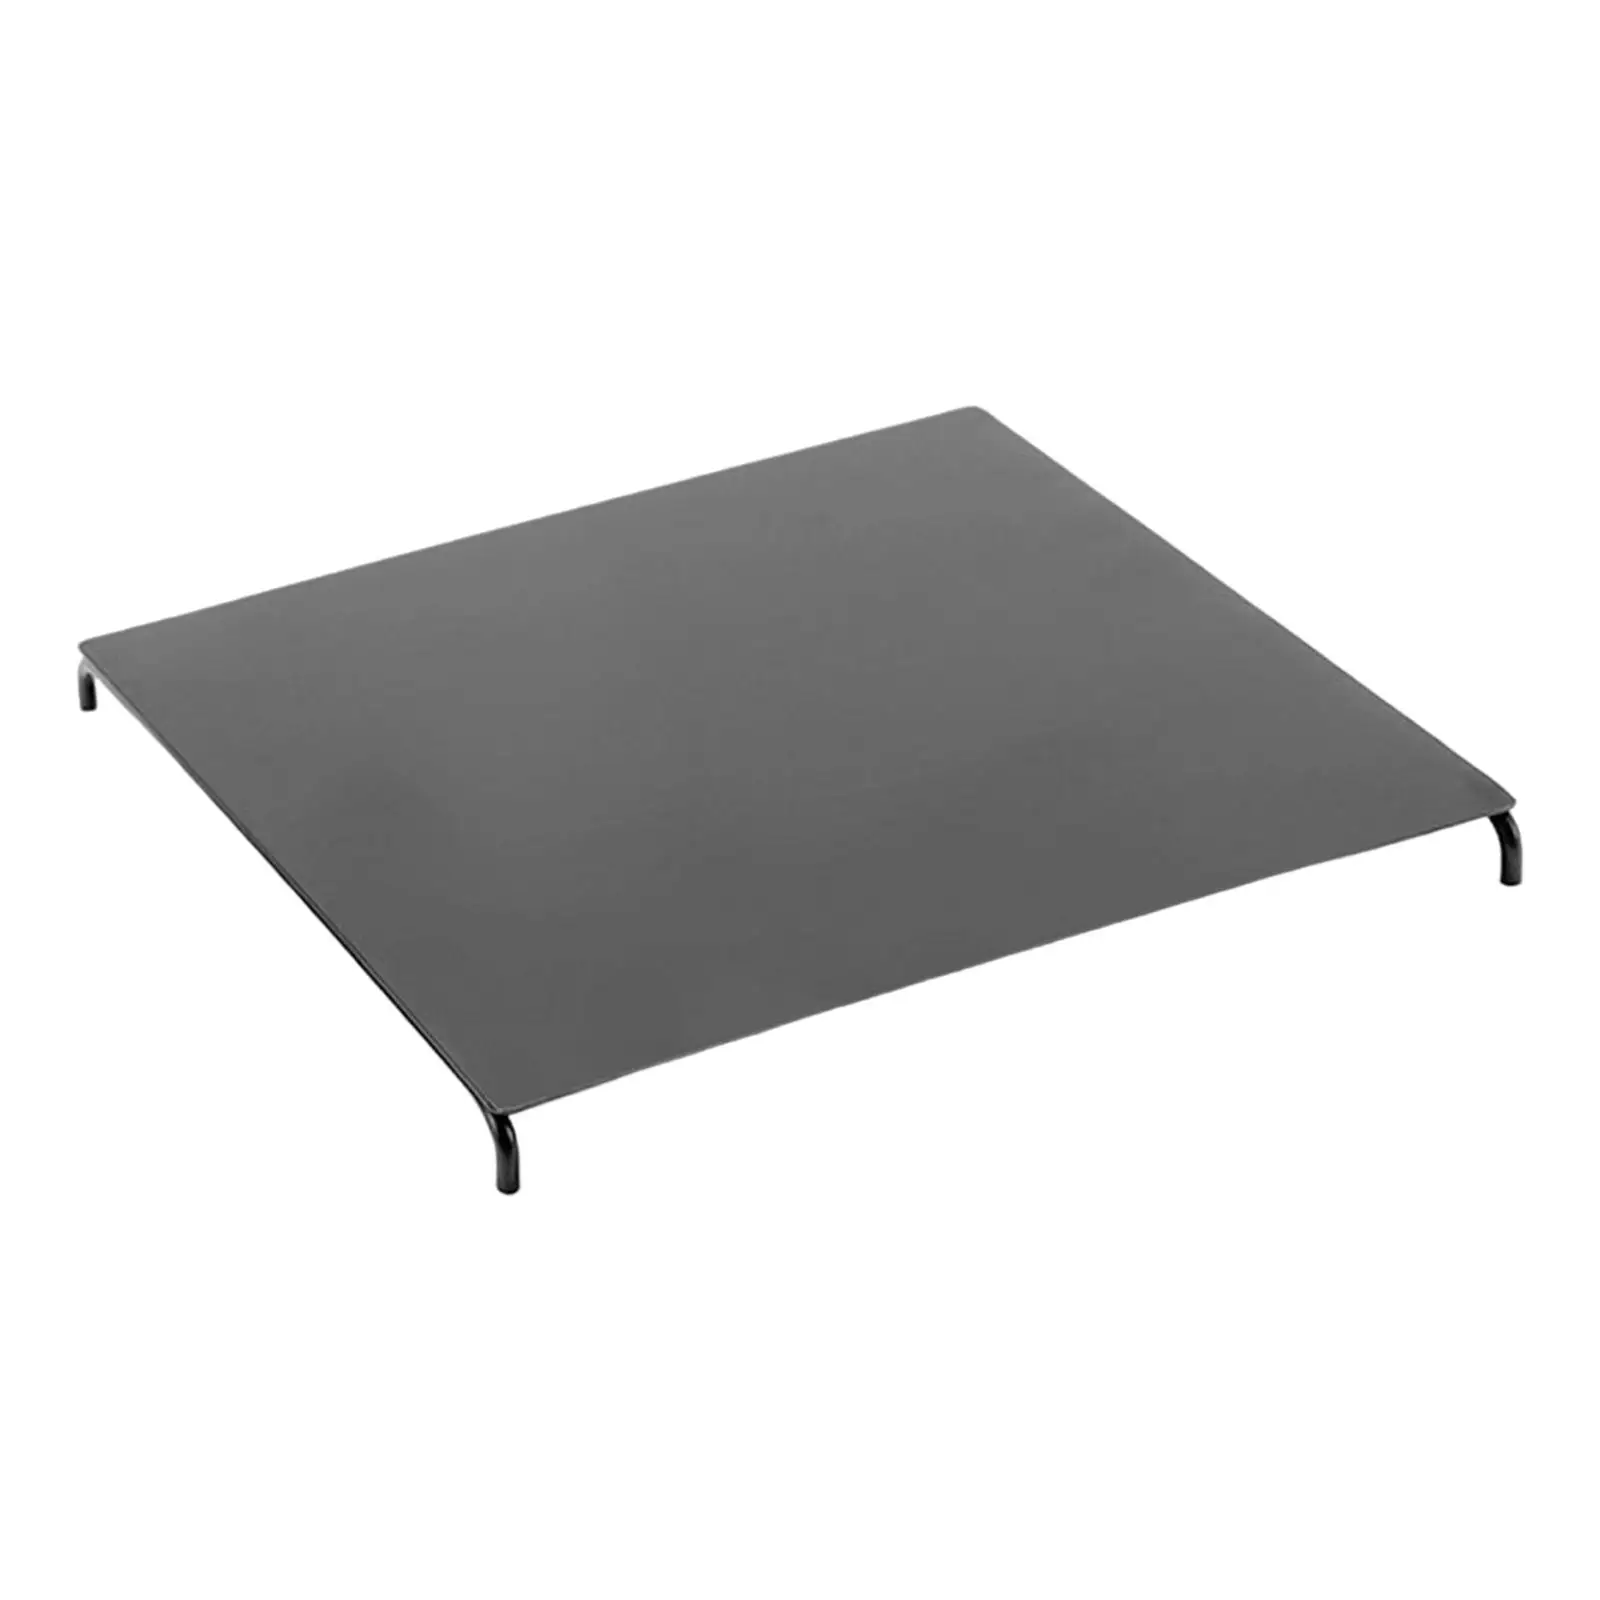 Camping Folding Table Desktop Portable Camping Table Tabletop for the